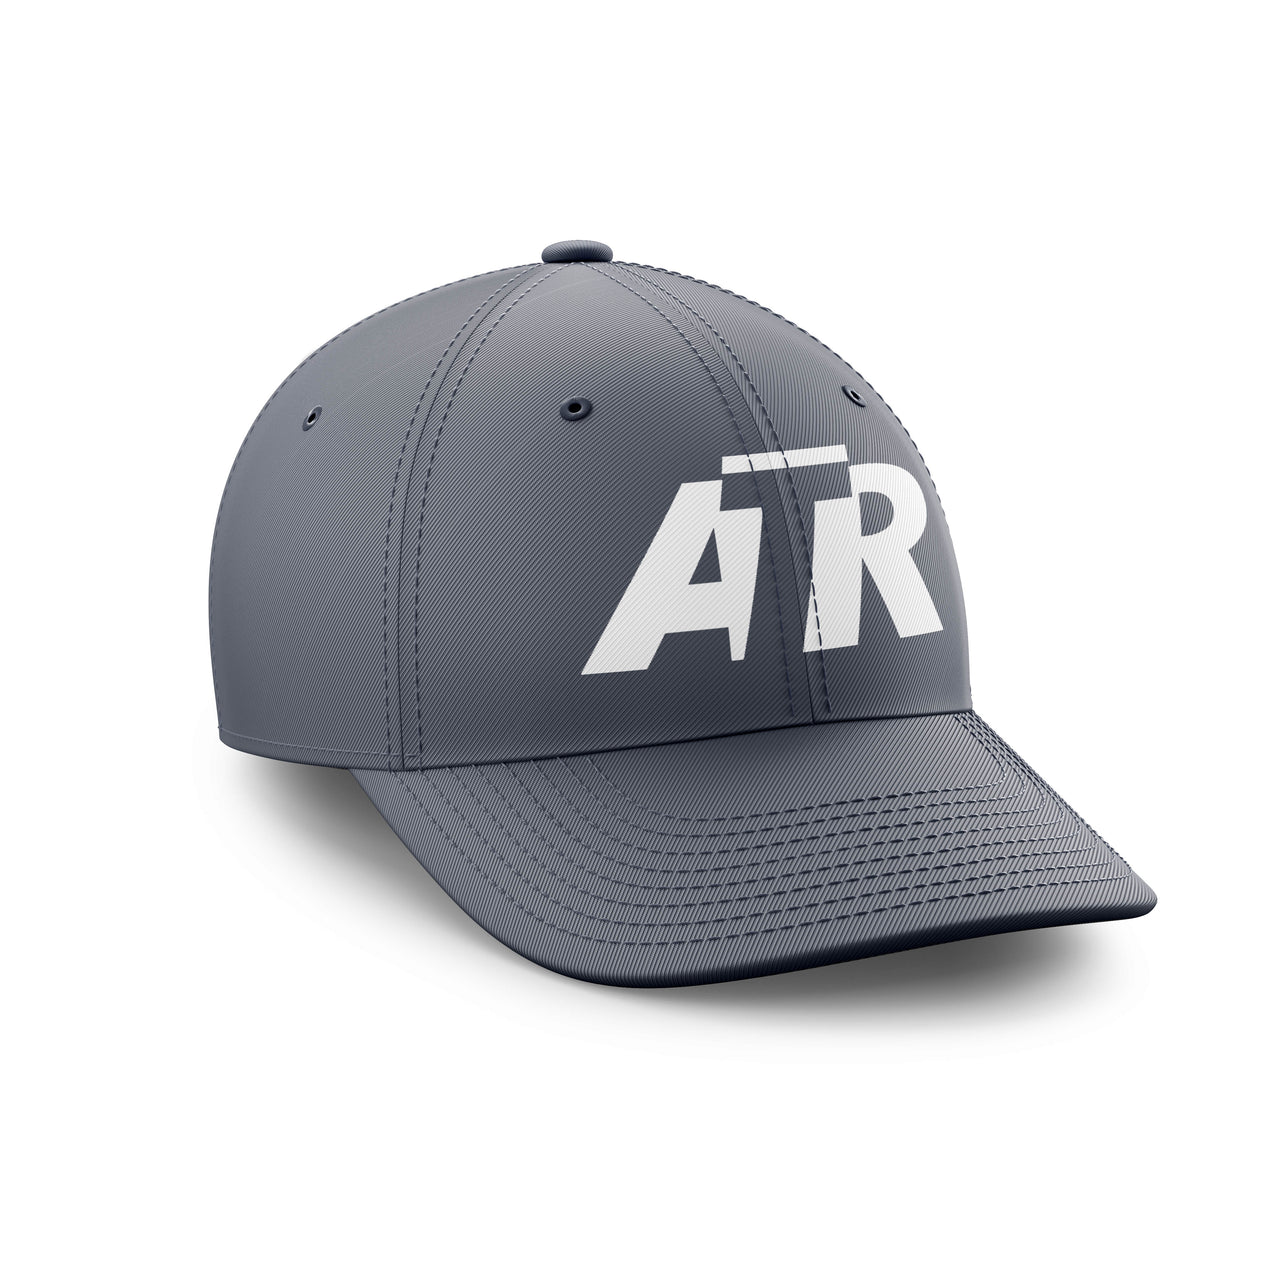 ATR & Text Designed Embroidered Hats